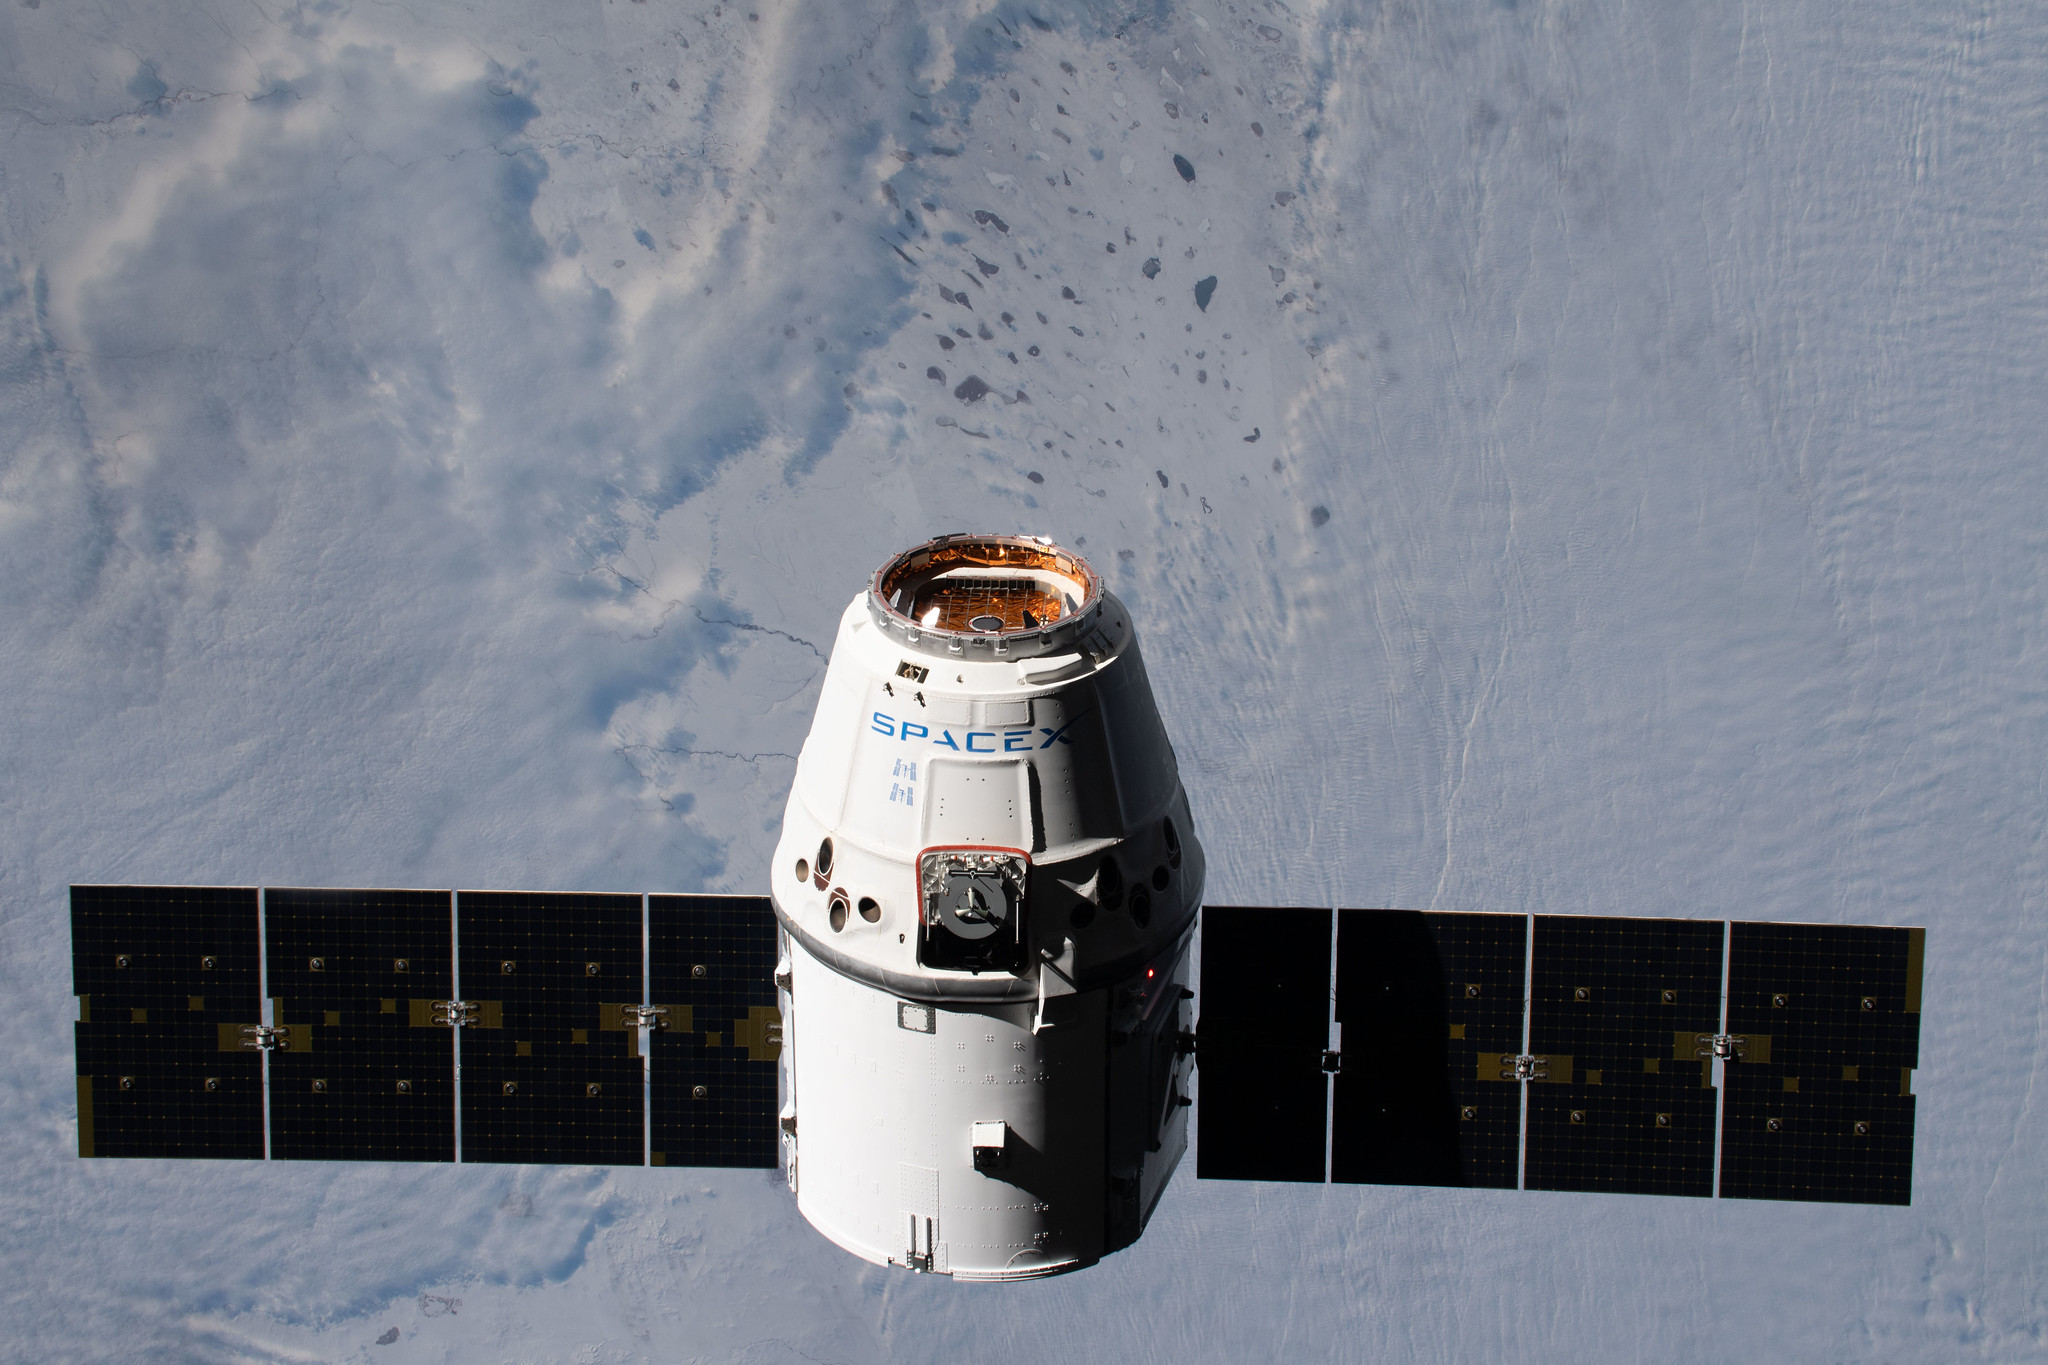 A SpaceX Dragon resupply ship approaches the International Space Station on Dec. 8, 2019.